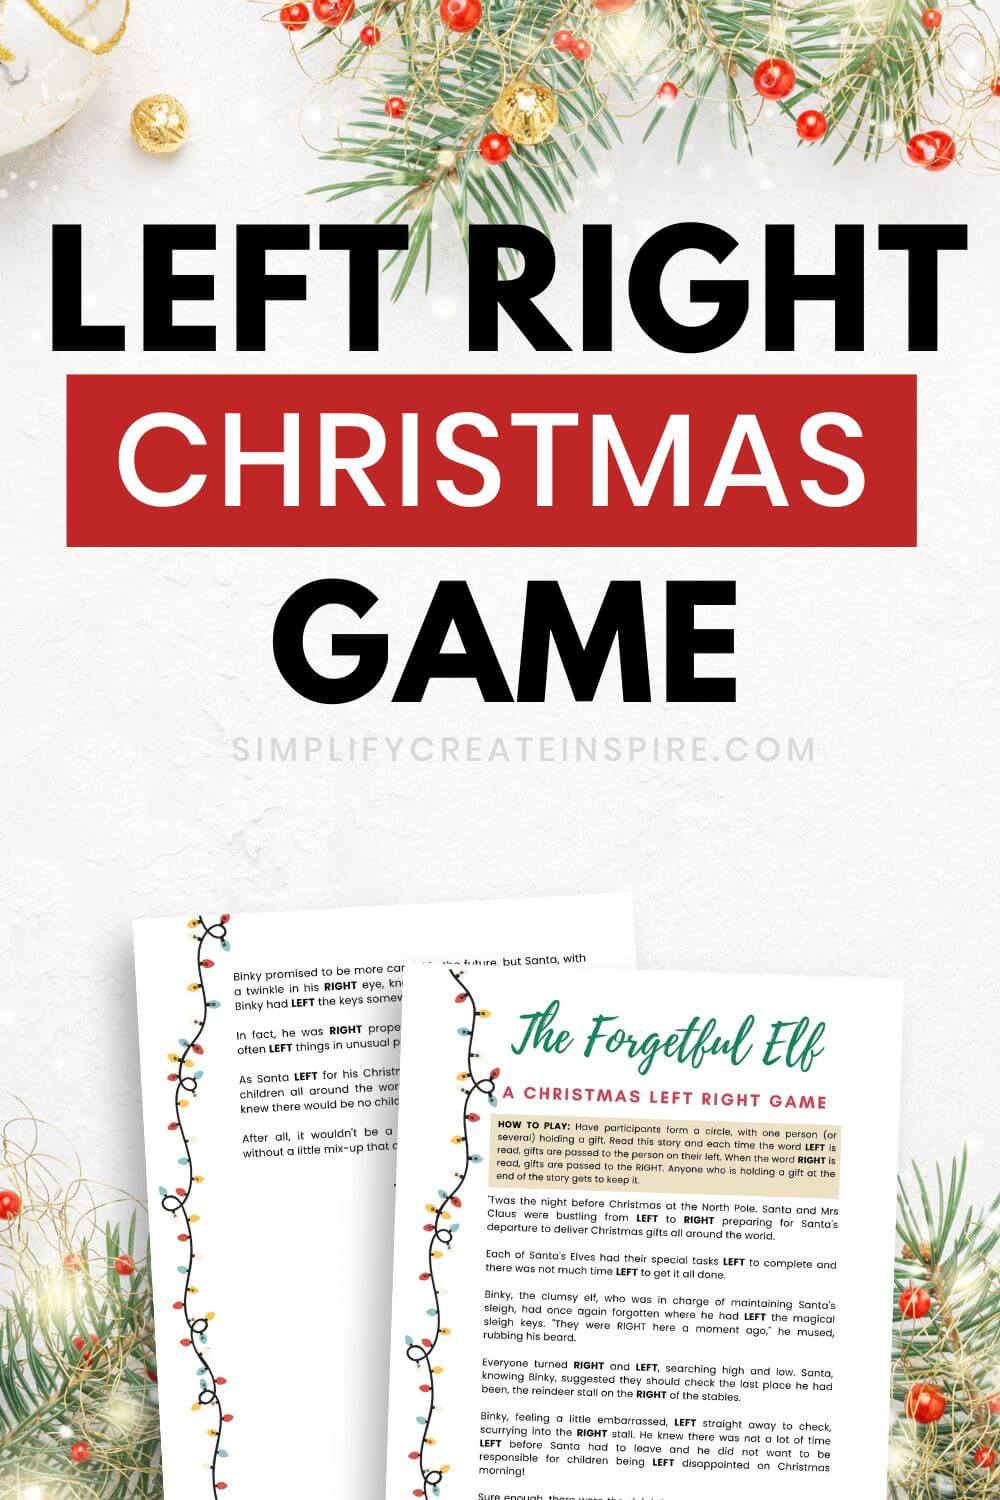 Christmas left right game.